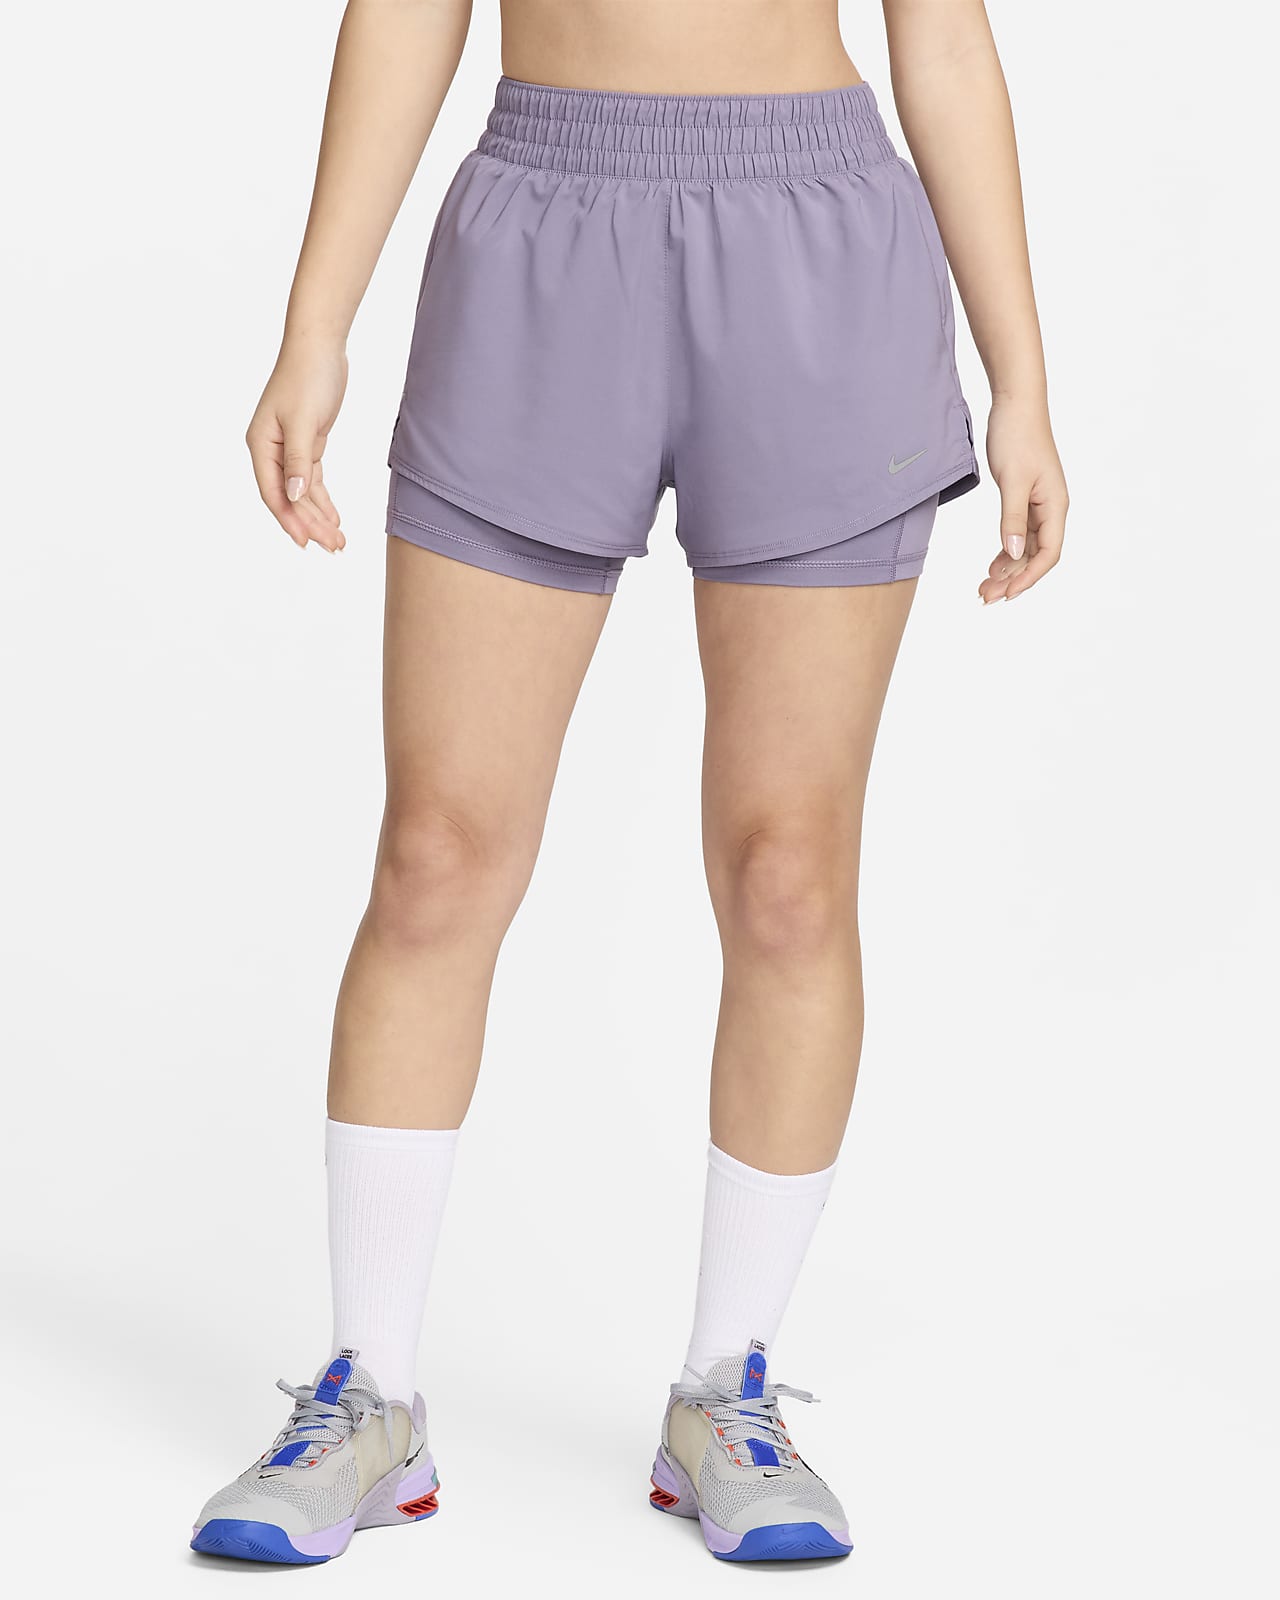 Nike One Women's Dri-FIT High-Waisted 3" 2-in-1 Shorts